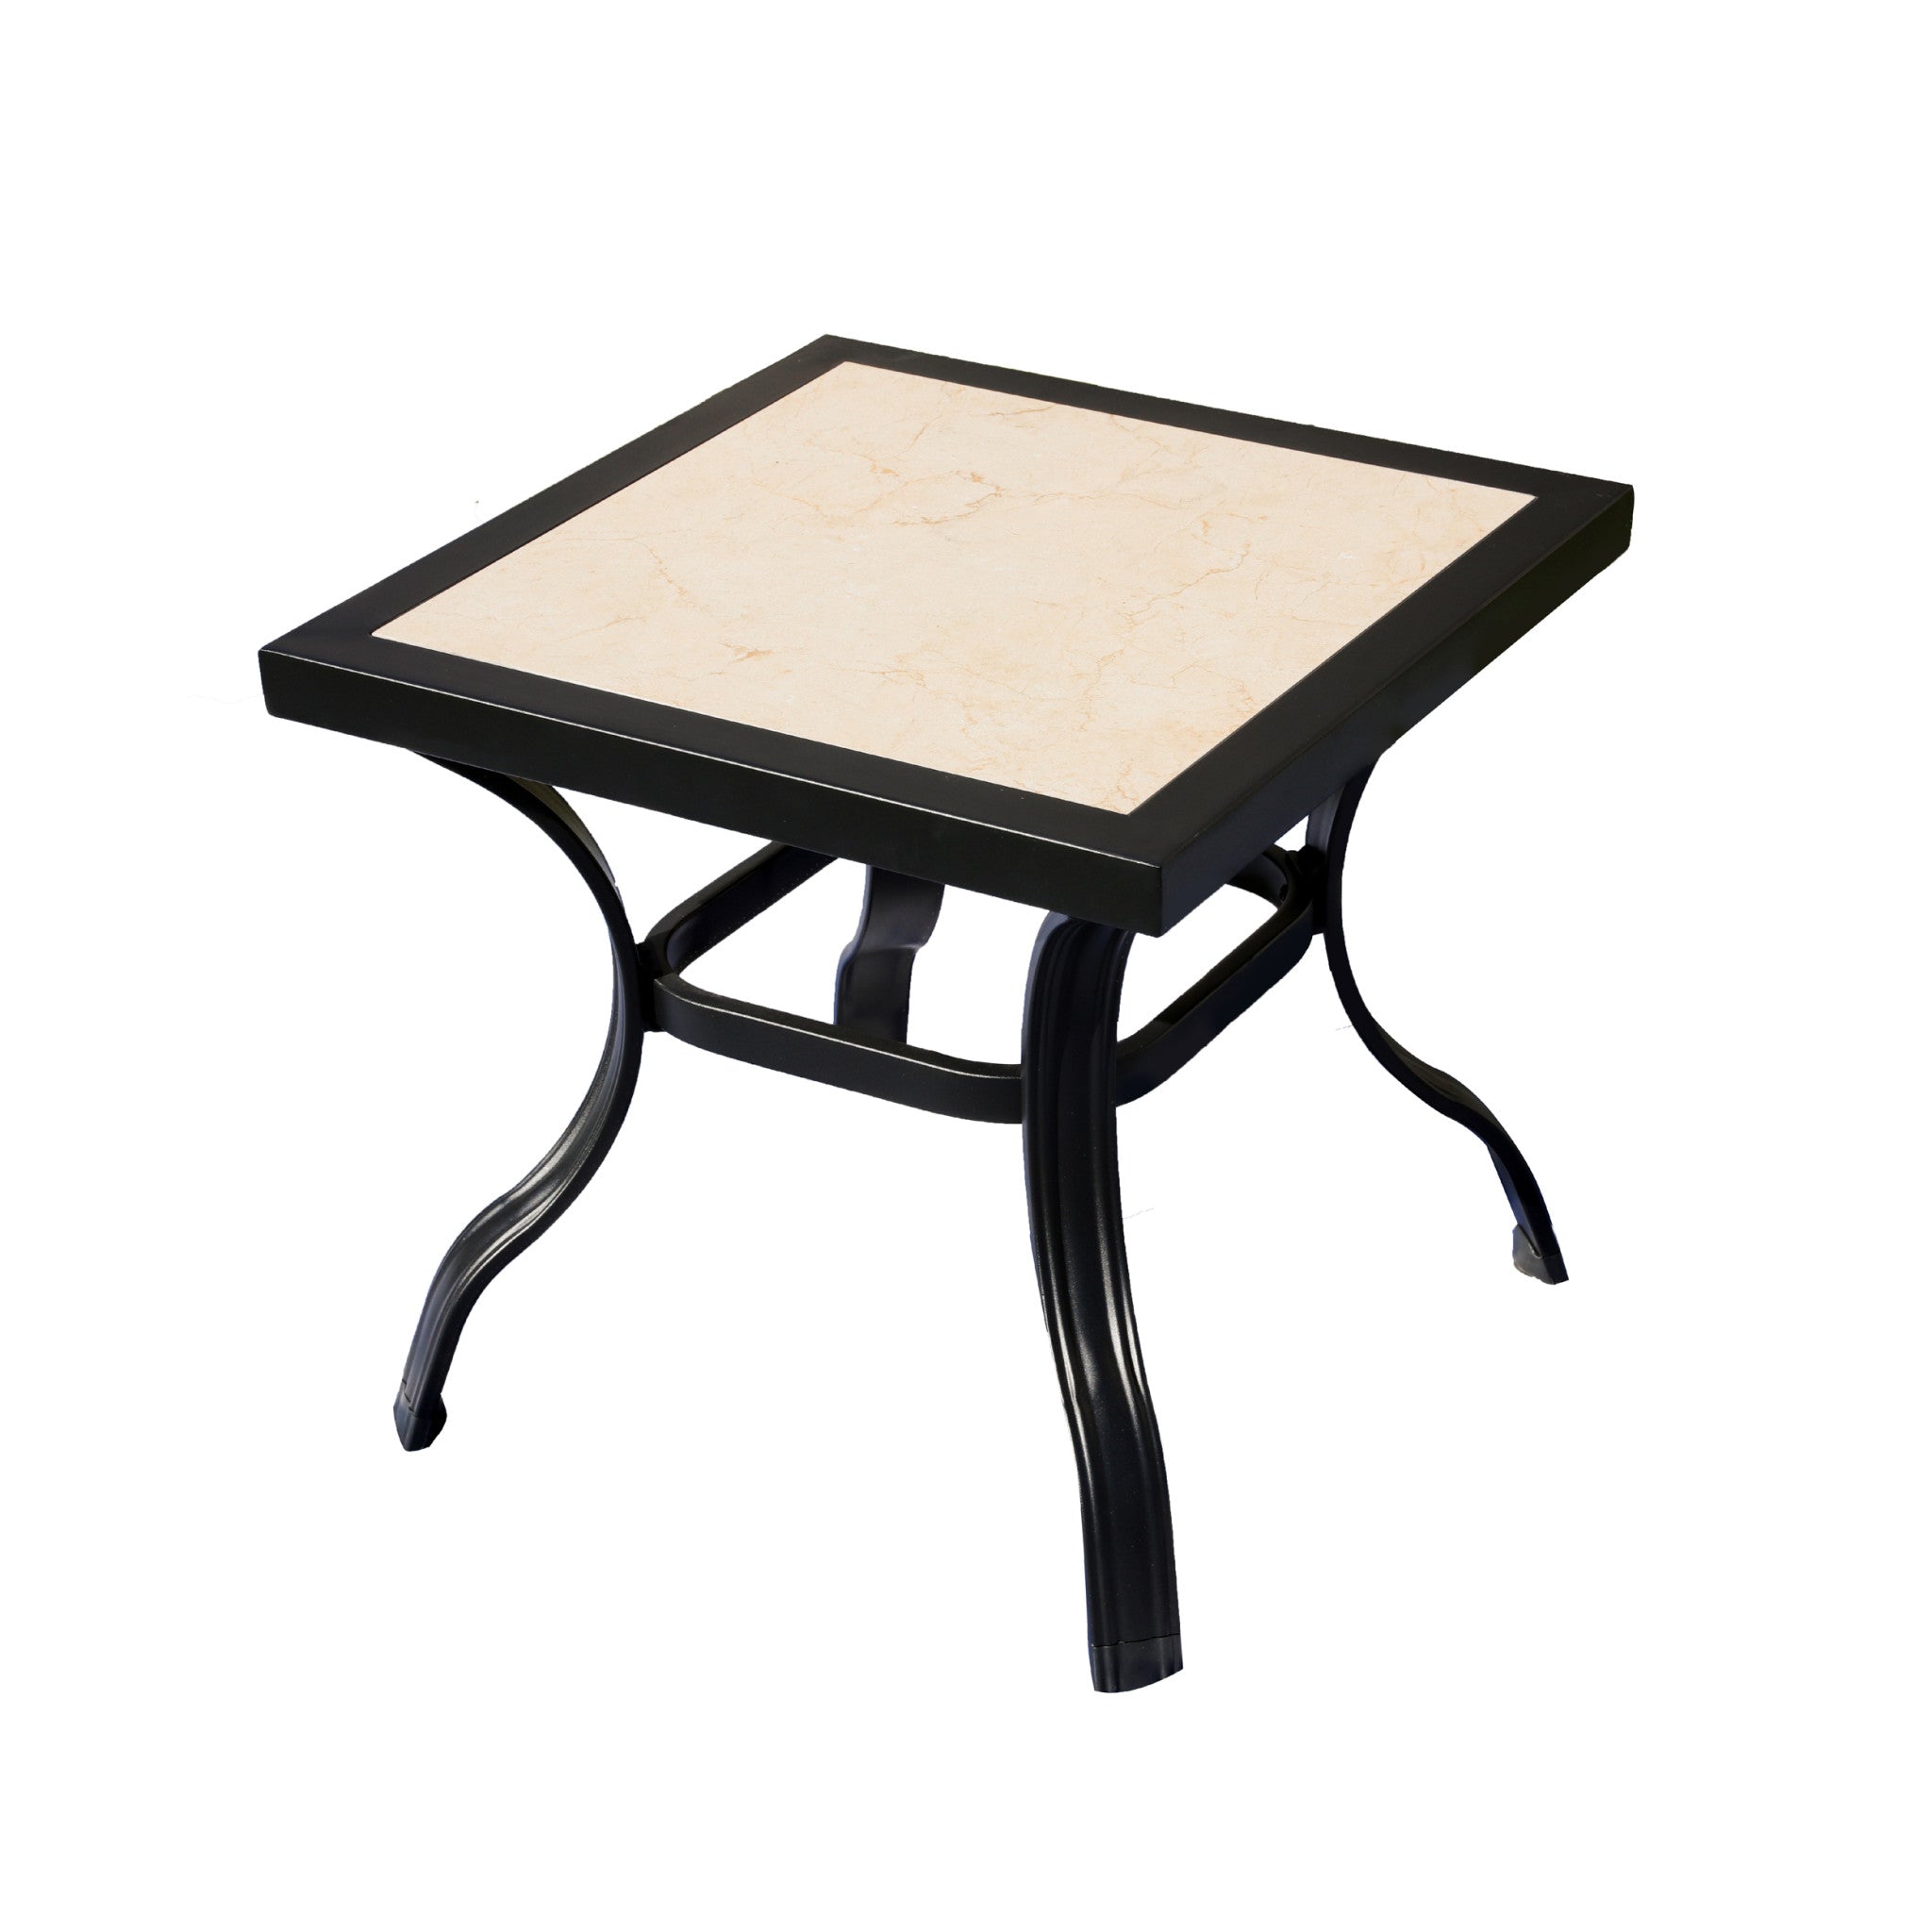 21" Beige and Ivory Square Ceramic Outdoor Side Table